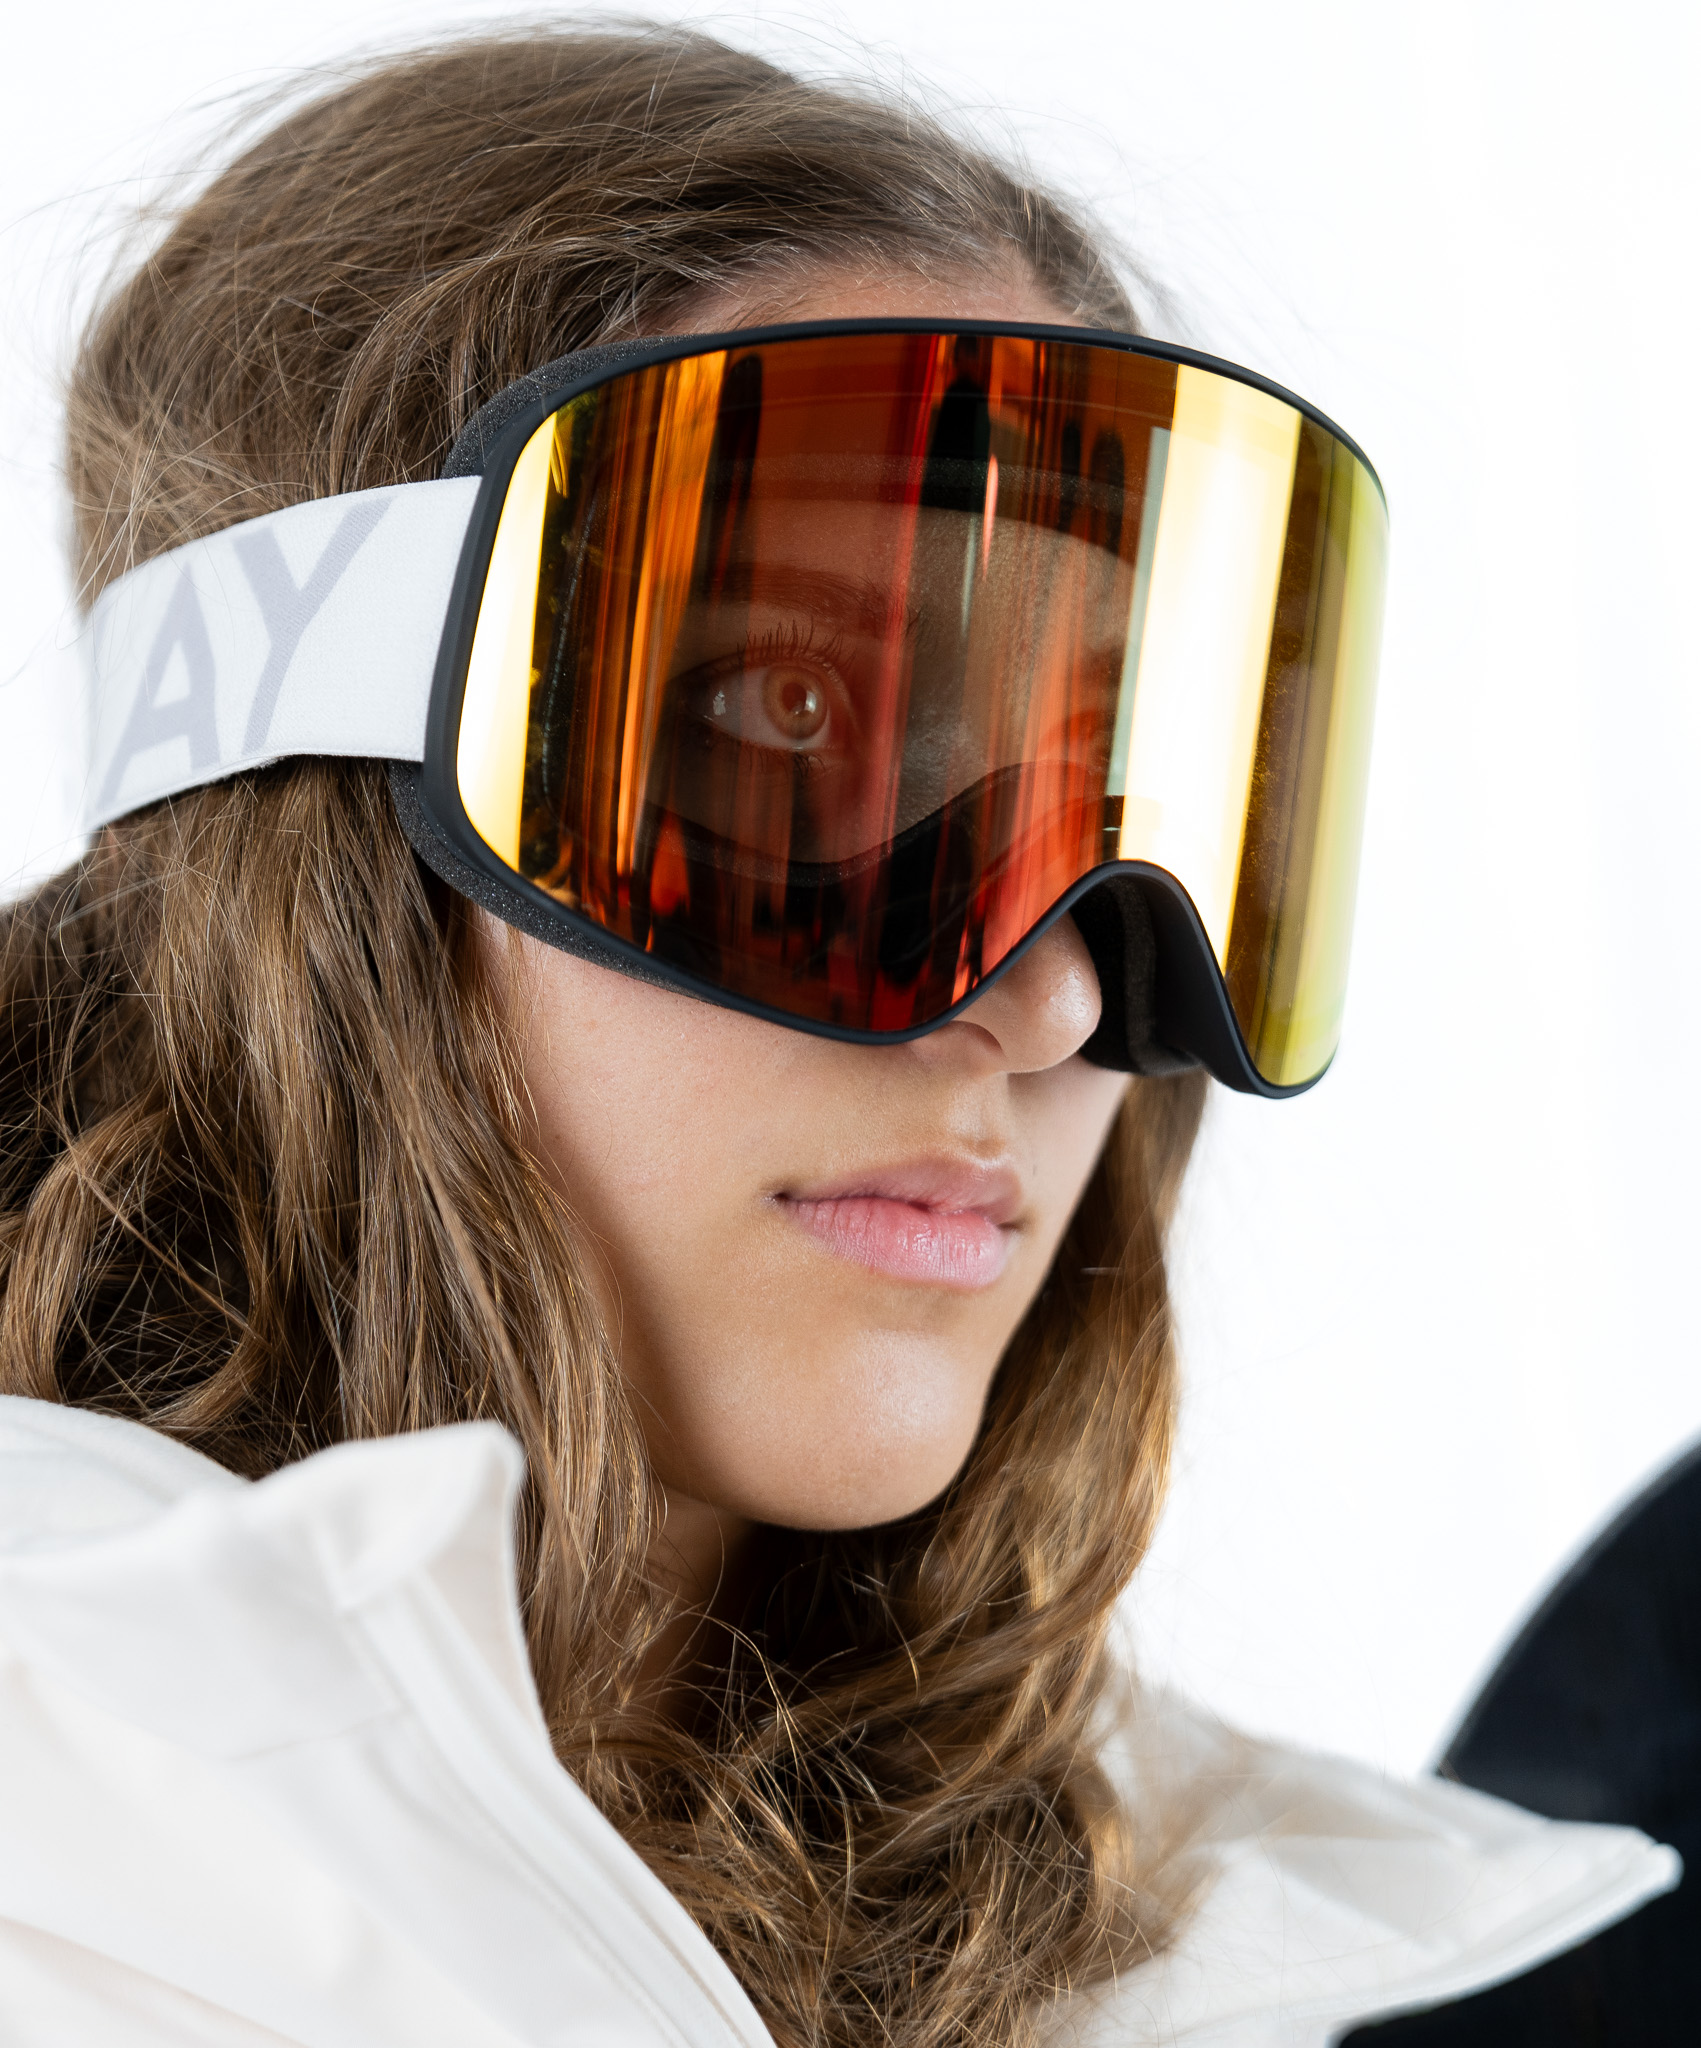 A model wearing IconPro ski goggles, part of the Best Gifts for Skiers selection: gifts for her. The goggles feature a sleek design with a white strap and gold lens, highlighting their stylish and functional aspects.